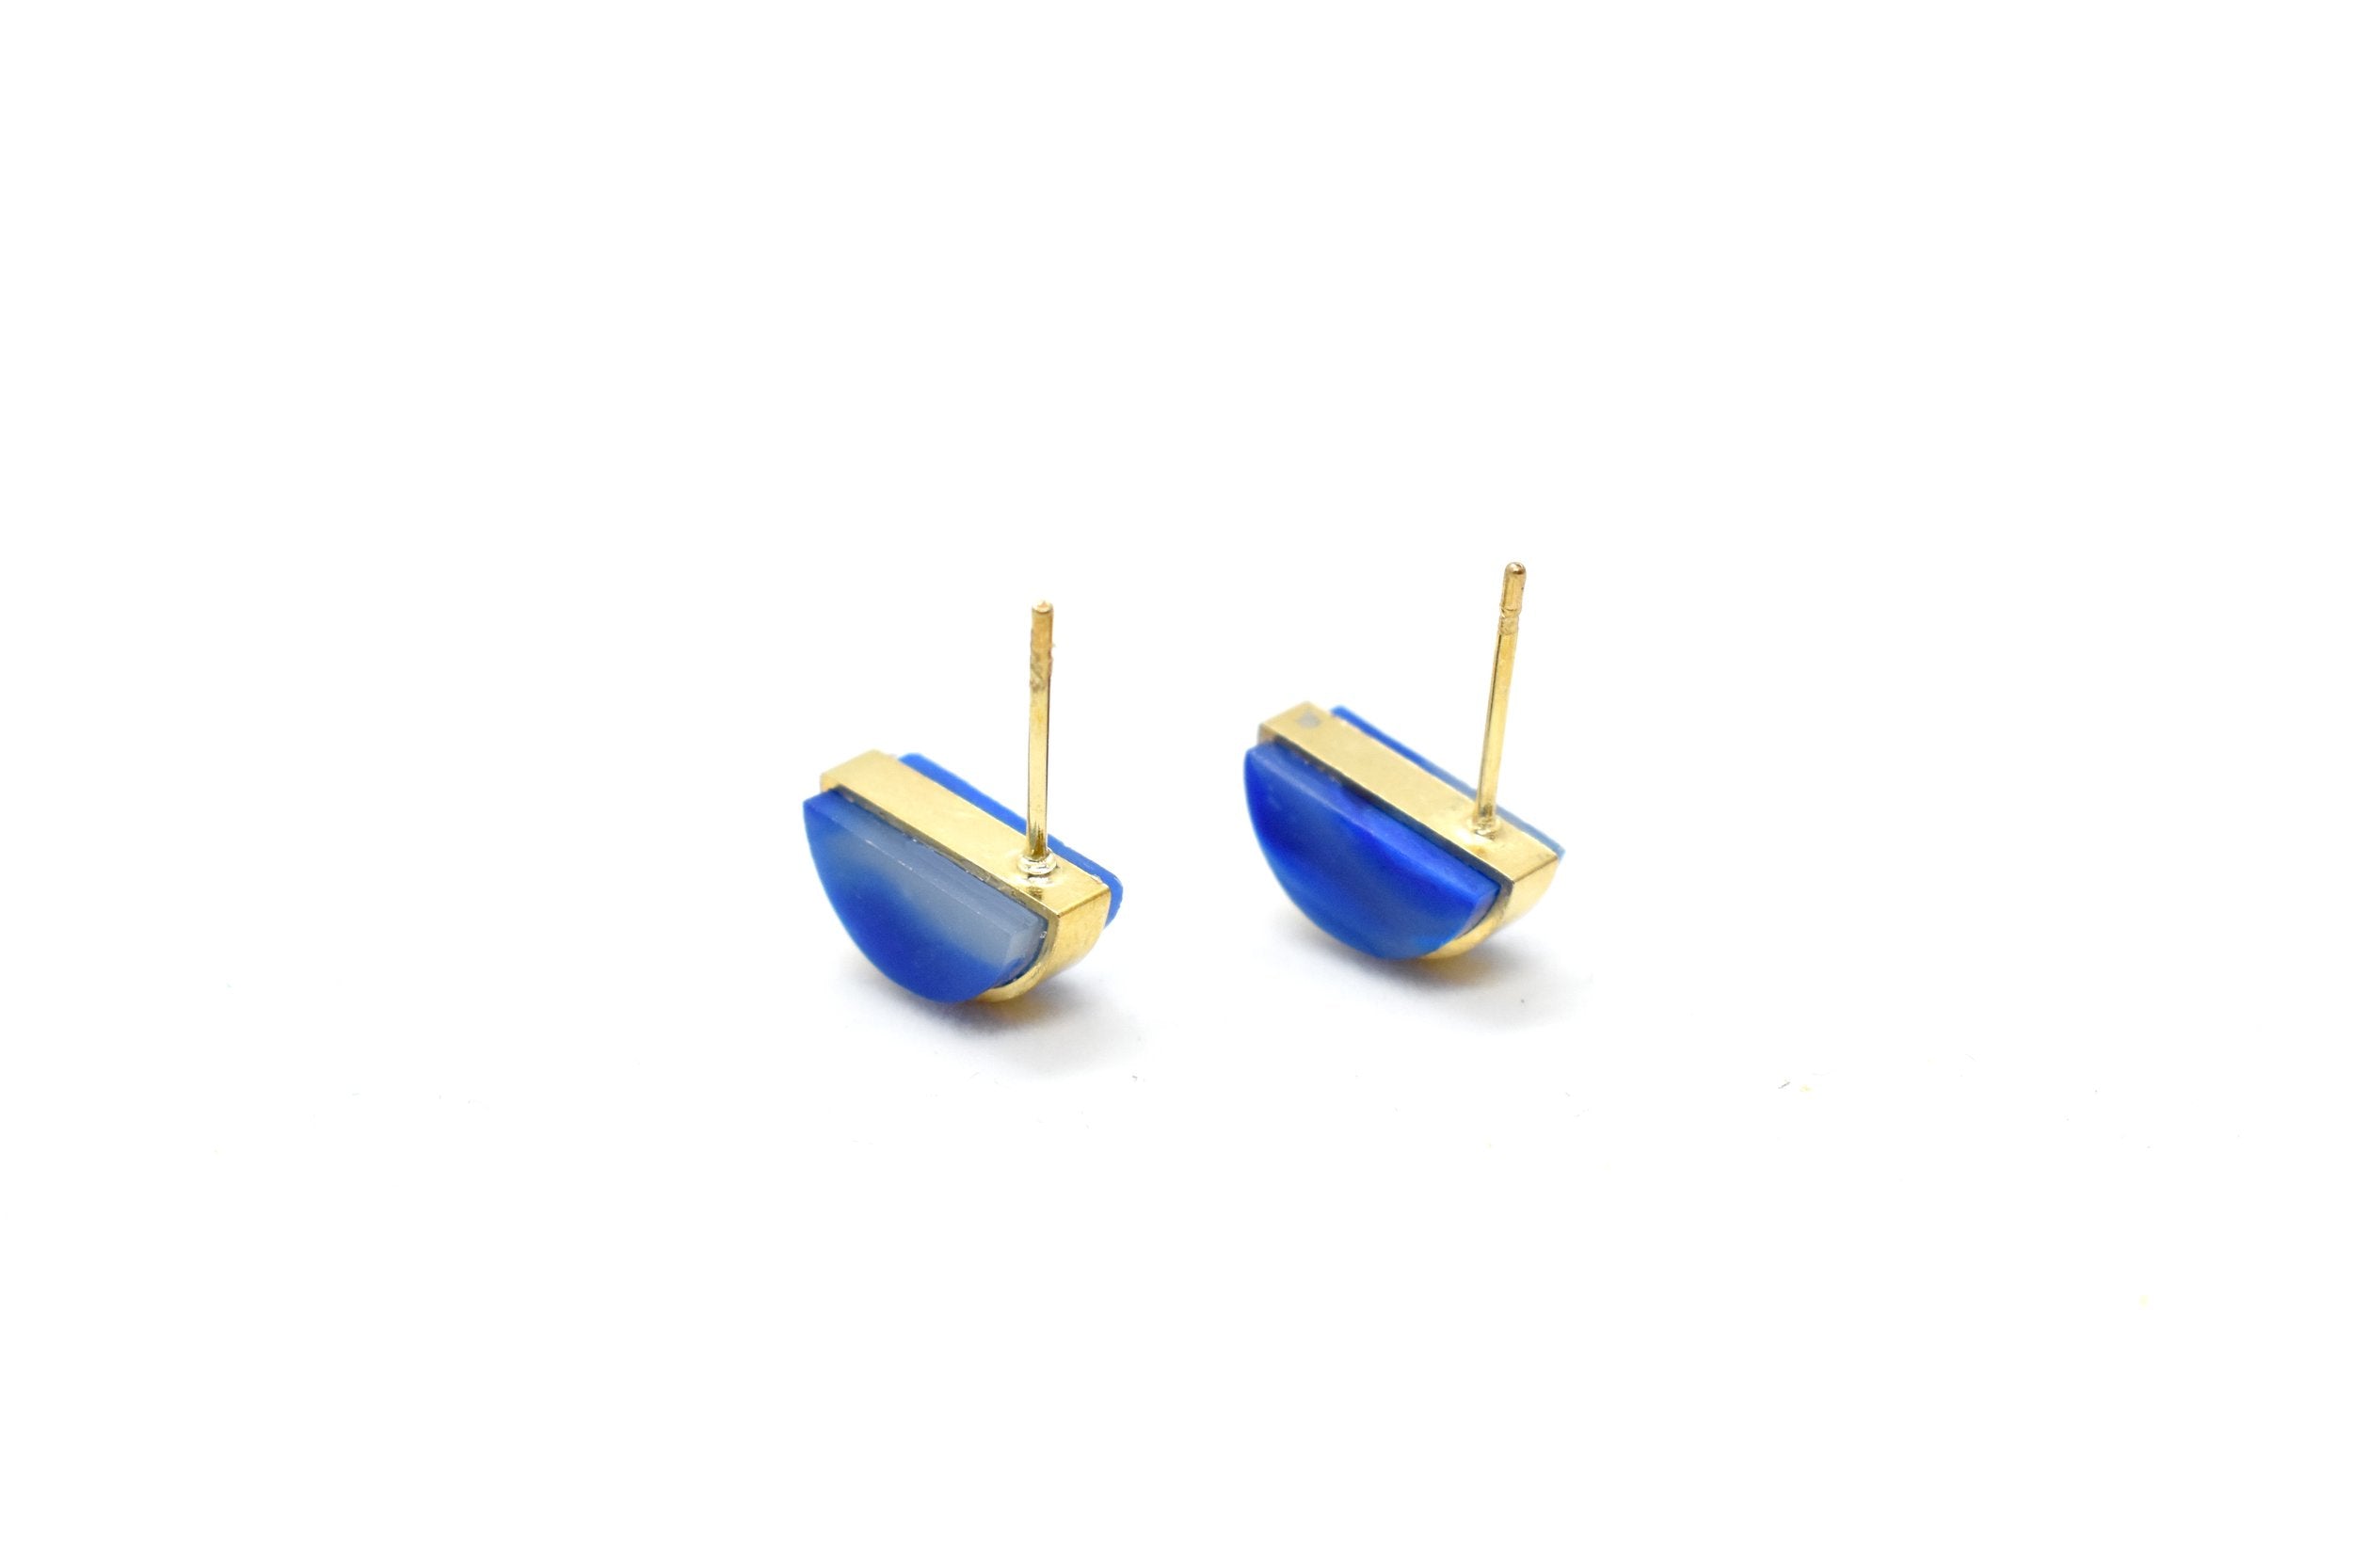 a pair of tiny gold studs flipped over to show the surgical steel post, they are marbled polymer clay gold earrings in sapphire color birth stone virgo jewelry gemstone earrings